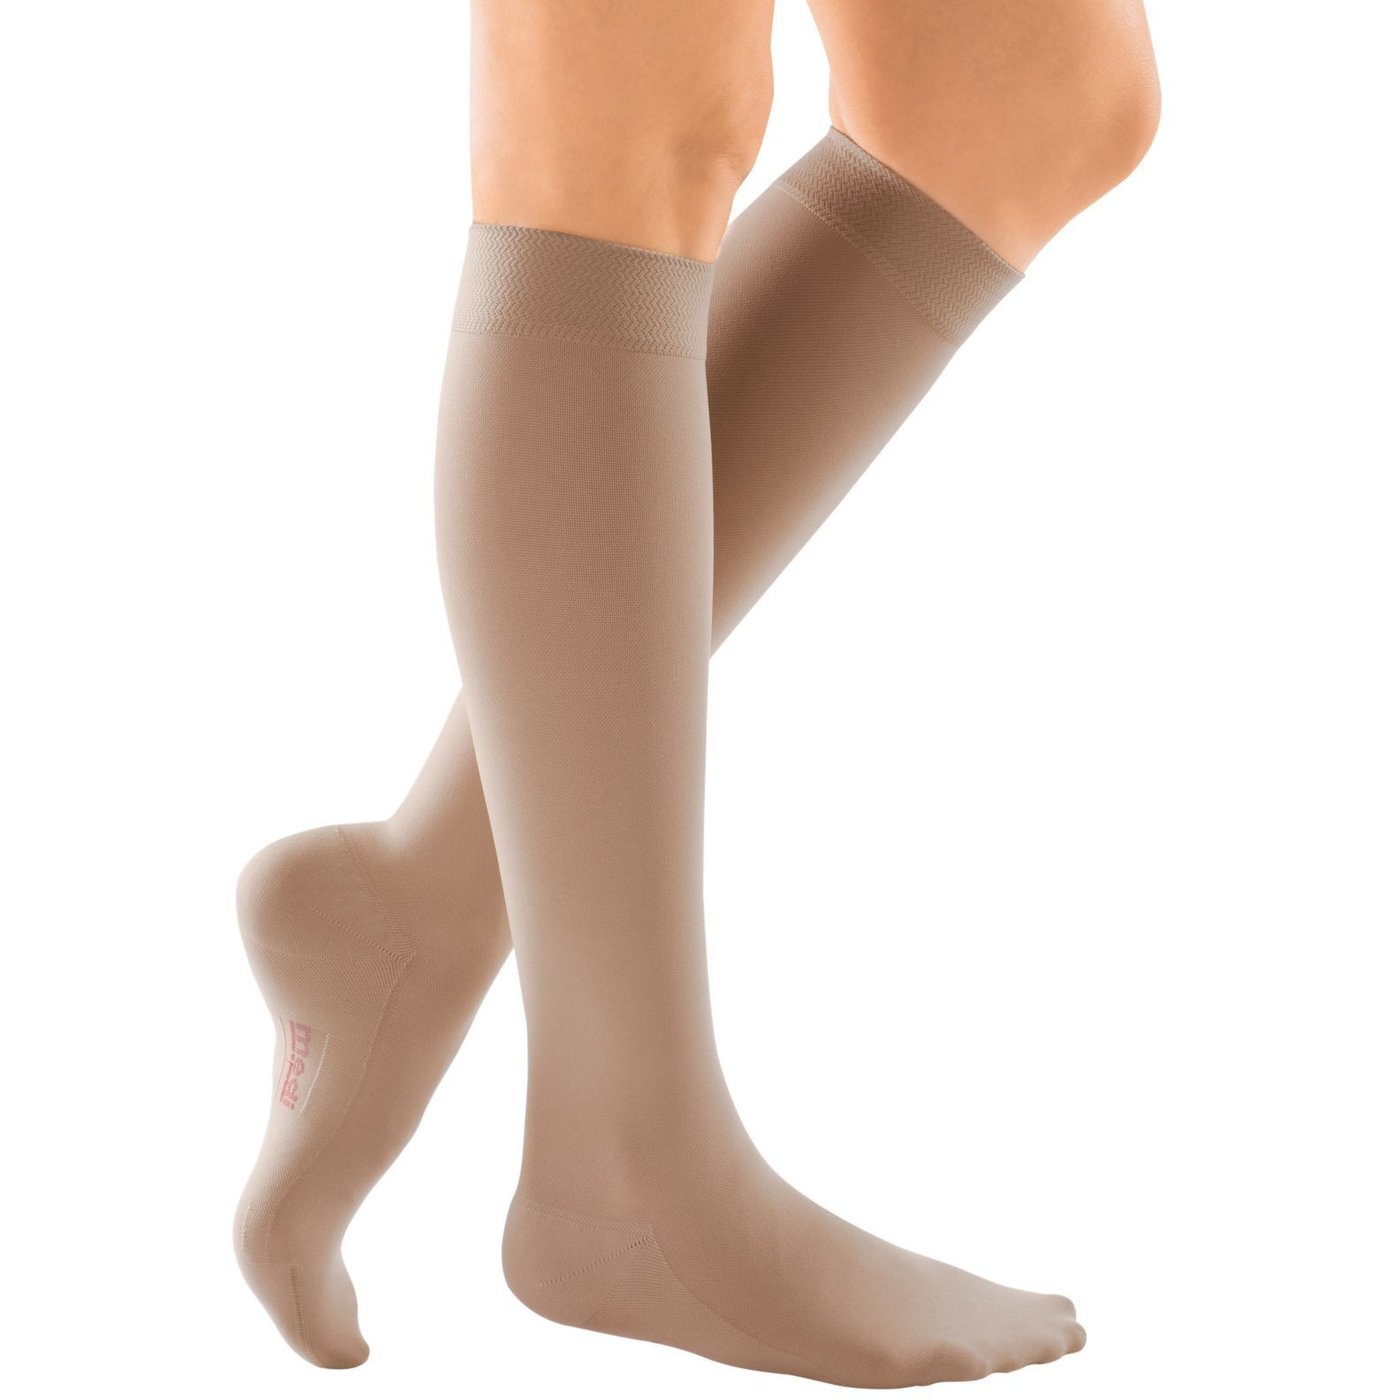  Compression Socks, 20-30 mmHg Graduated Knee-Hi Compression  Stockings for Unisex, Open Toe, Opaque, Support Hose for DVT, Pregnancy, Varicose  Veins, Relief Shin Splints, Edema, Beige Large : Health & Household